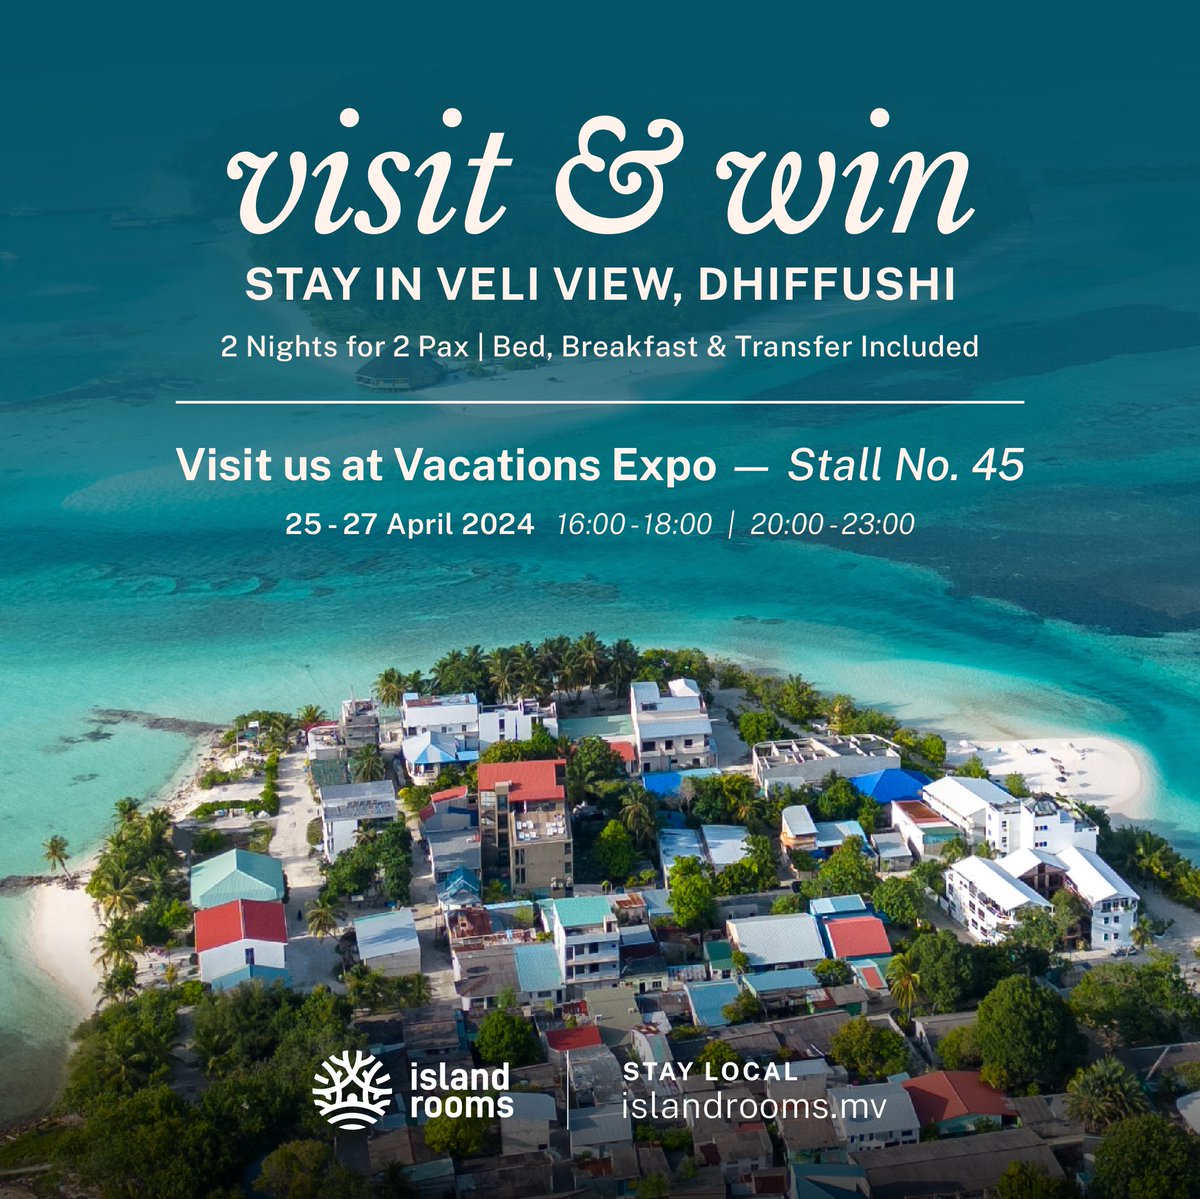 Join us at Vacations Expo from April 25th to April 27th at Central Park Hulhumale'  between 4:00 PM - 6:00 PM and 8:00 PM - 11:00 PM for a chance to win a 2-night stay for 2 adults at Dhiffushi!

#islandrooms #staylocal #maldivesgetaways #visitmaldives